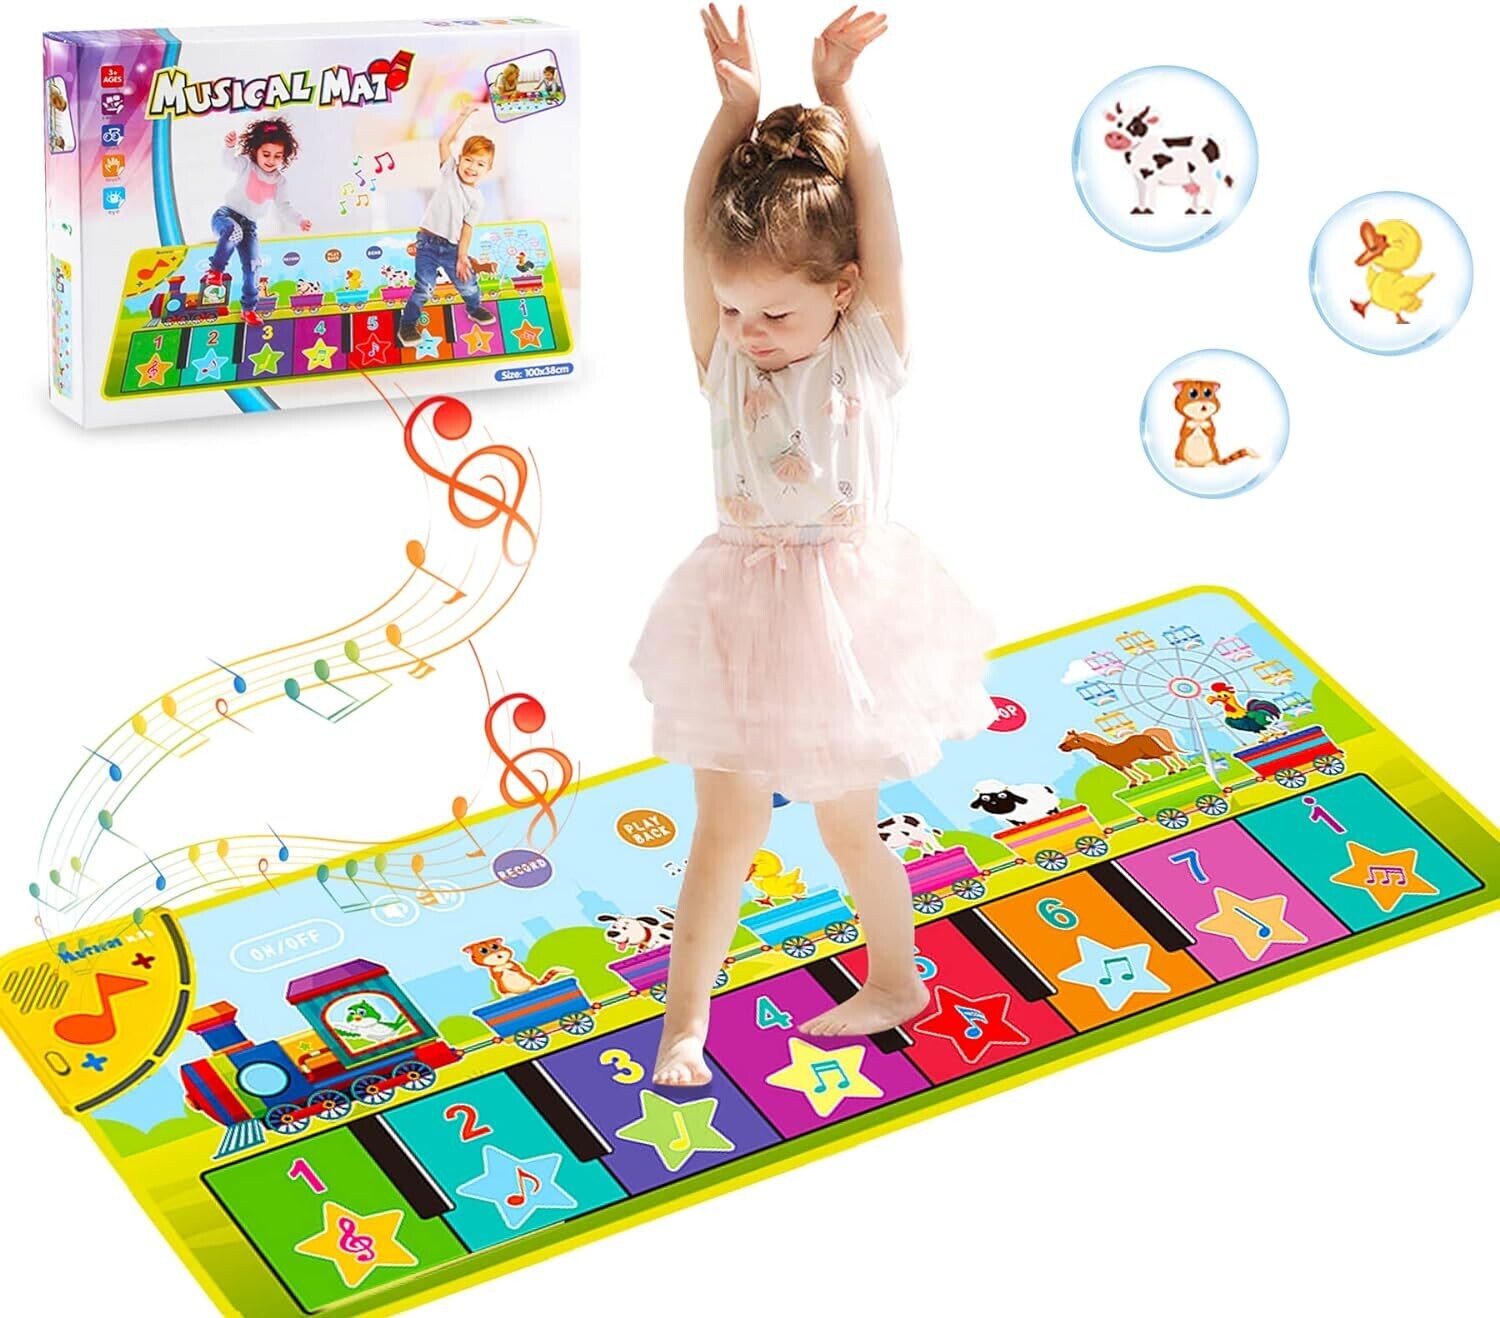 Children's Music Mat, Piano Mat, Children's Birthday Gifts, Educational Toy Gifts for 1 2 3 4 Years Boys Girls Toddlers, Baby